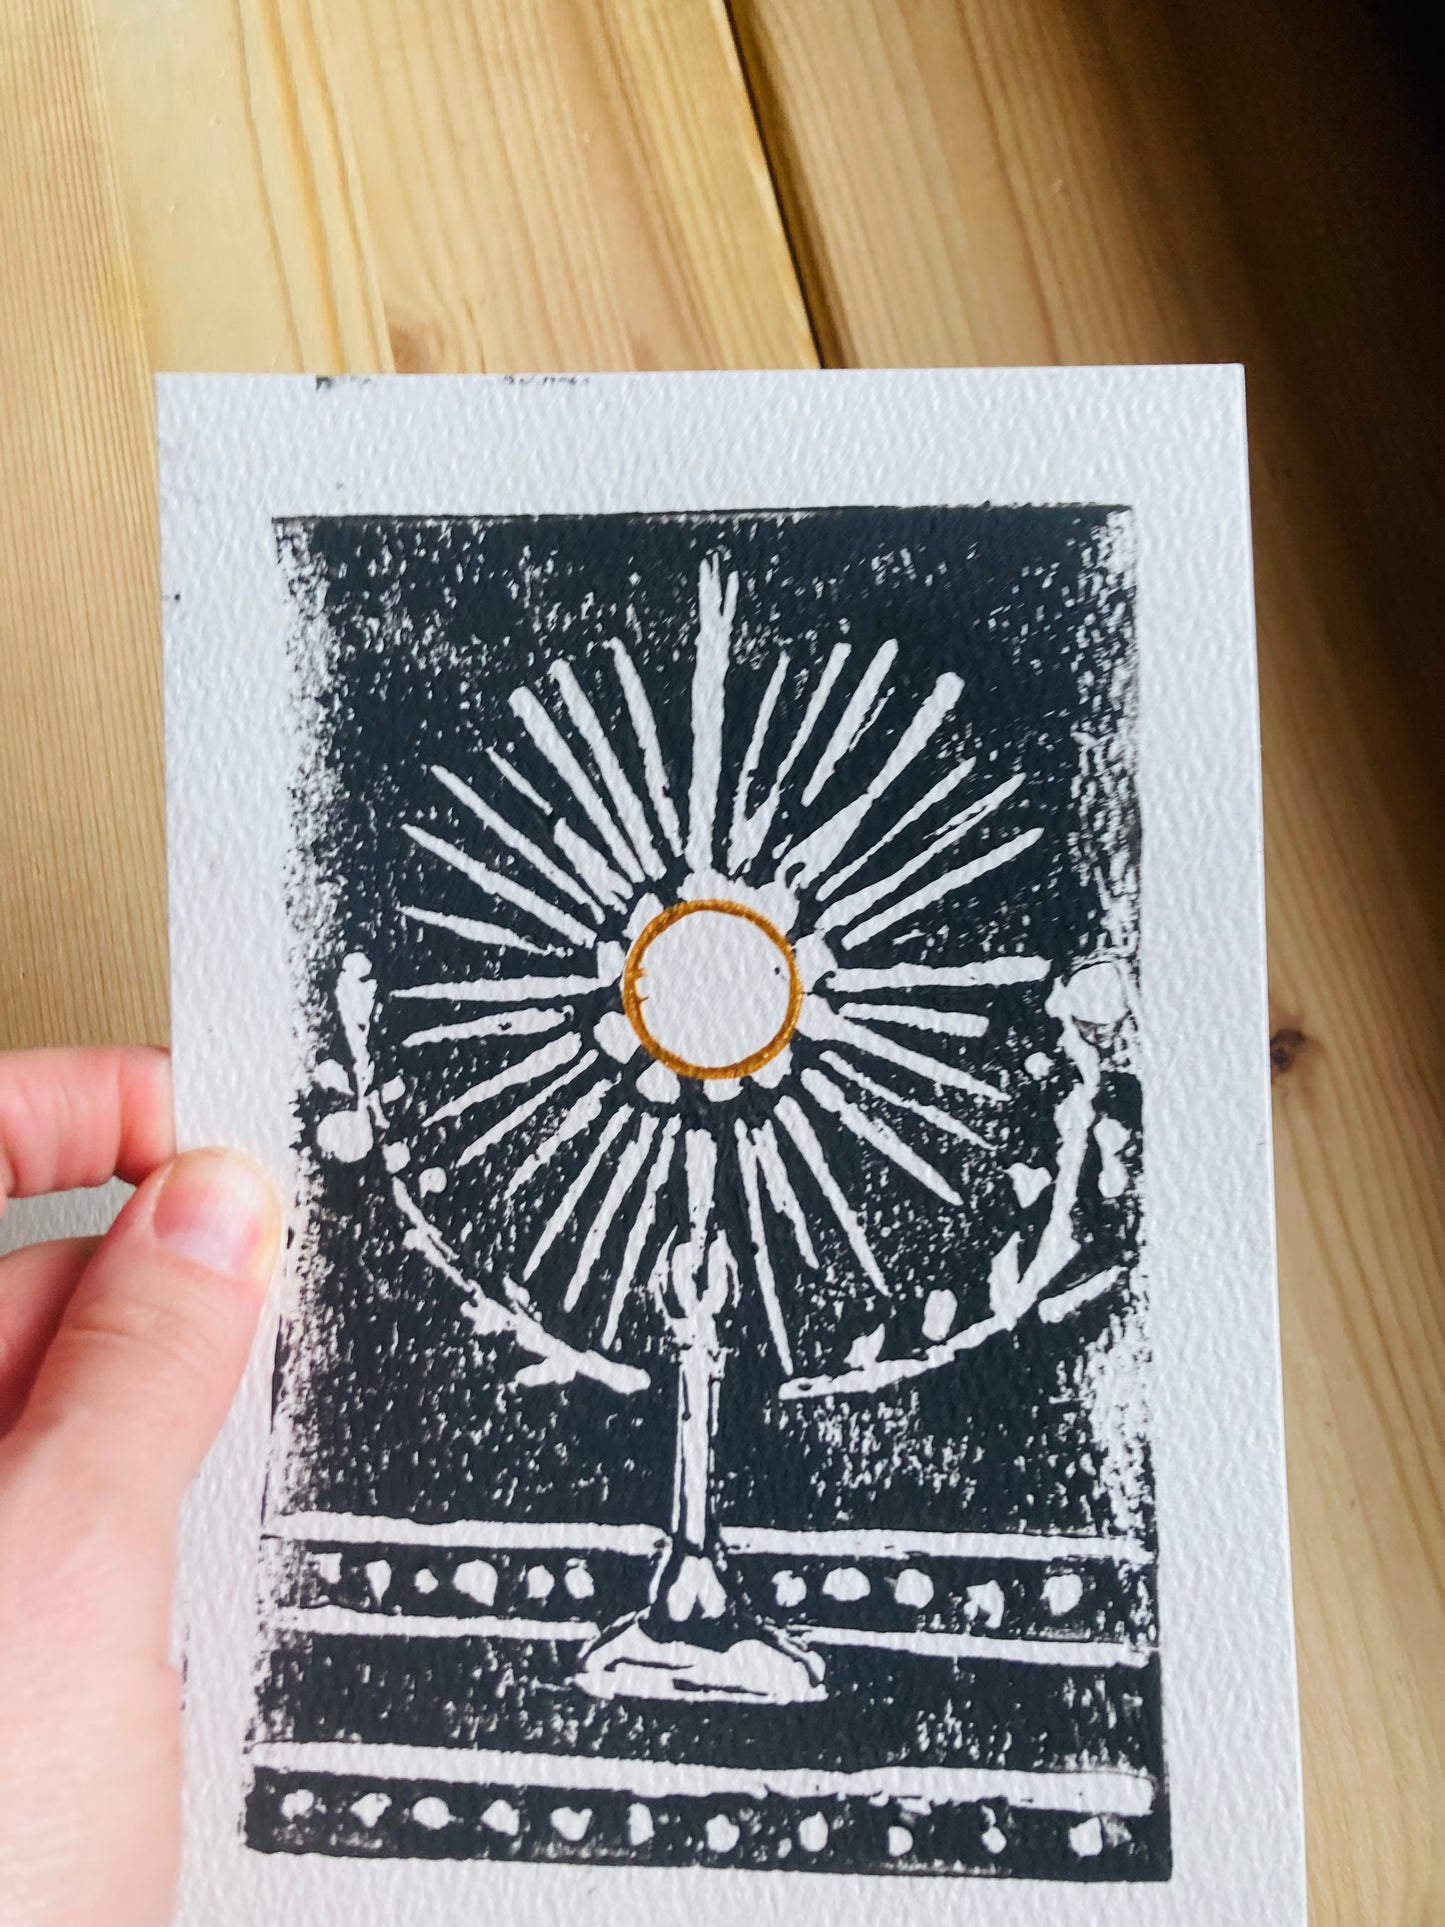 2. The Crib. The Cross. The Cup(Eucharist) block print collection